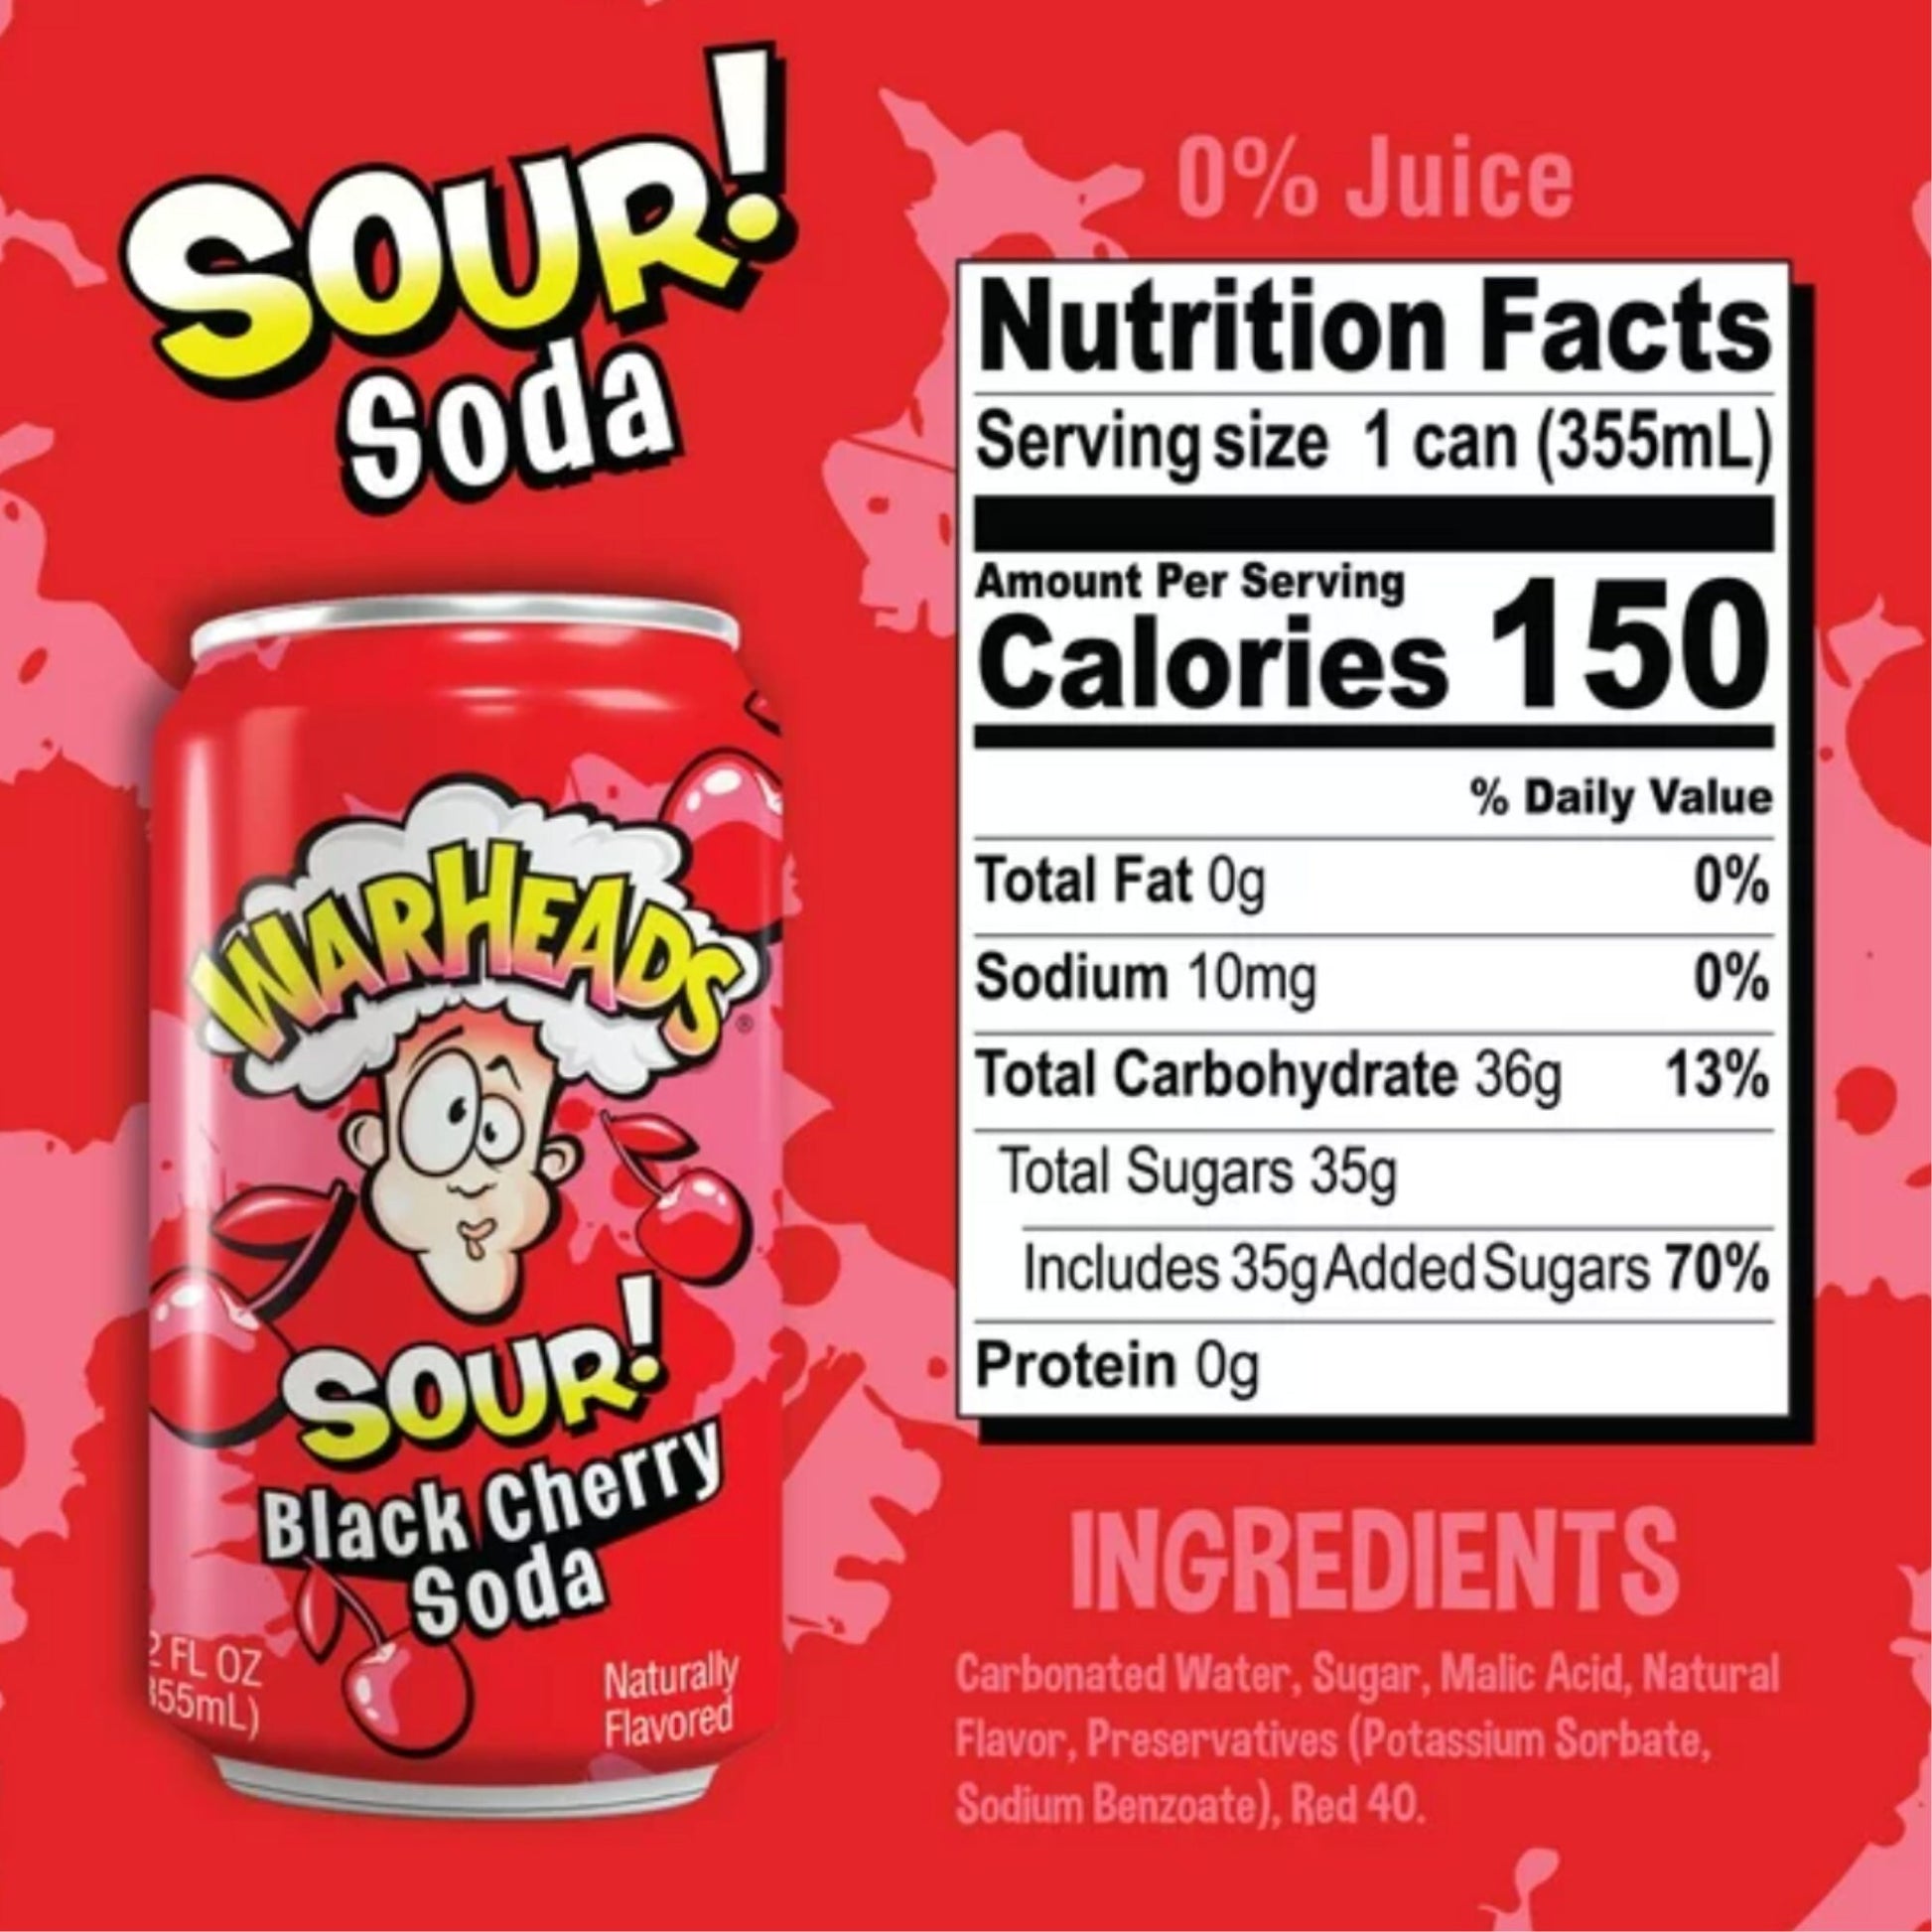 Sour Black Cherry Warheads Soda - Nutrition Facts and Ingredients